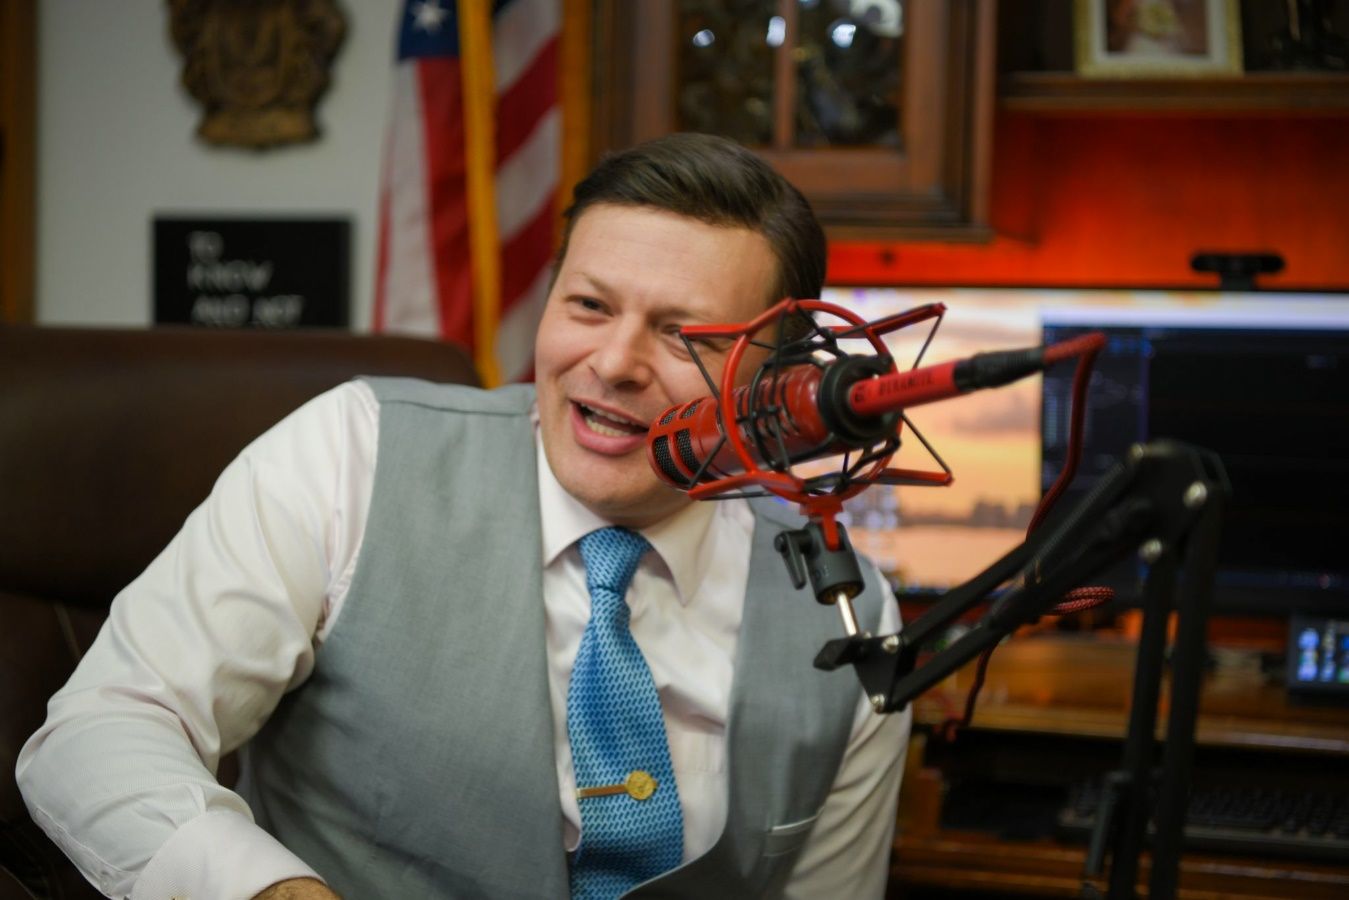 A person in a vest and tie with a microphone in front of him Description automatically generated